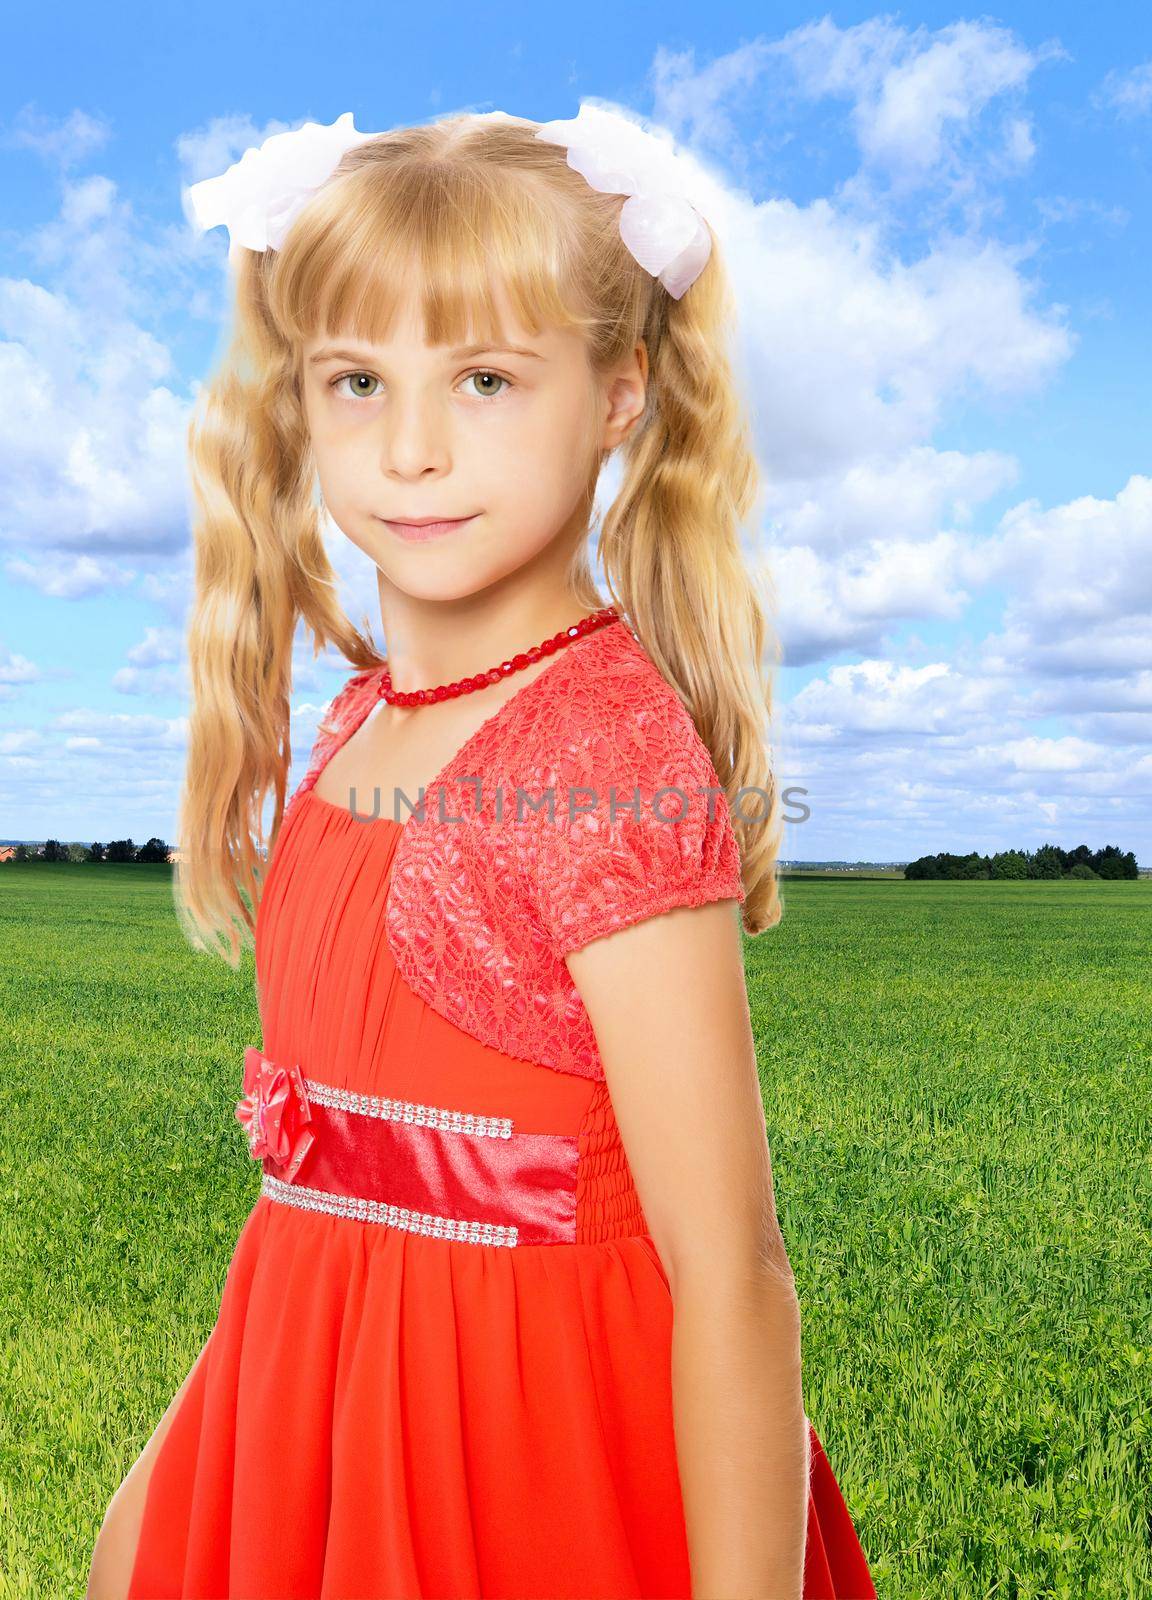 A very beautiful little girl with long, blonde ponytails on her head in a bright orange dress . close-up.On the background of bright green grass and blue sky with beautiful clouds.